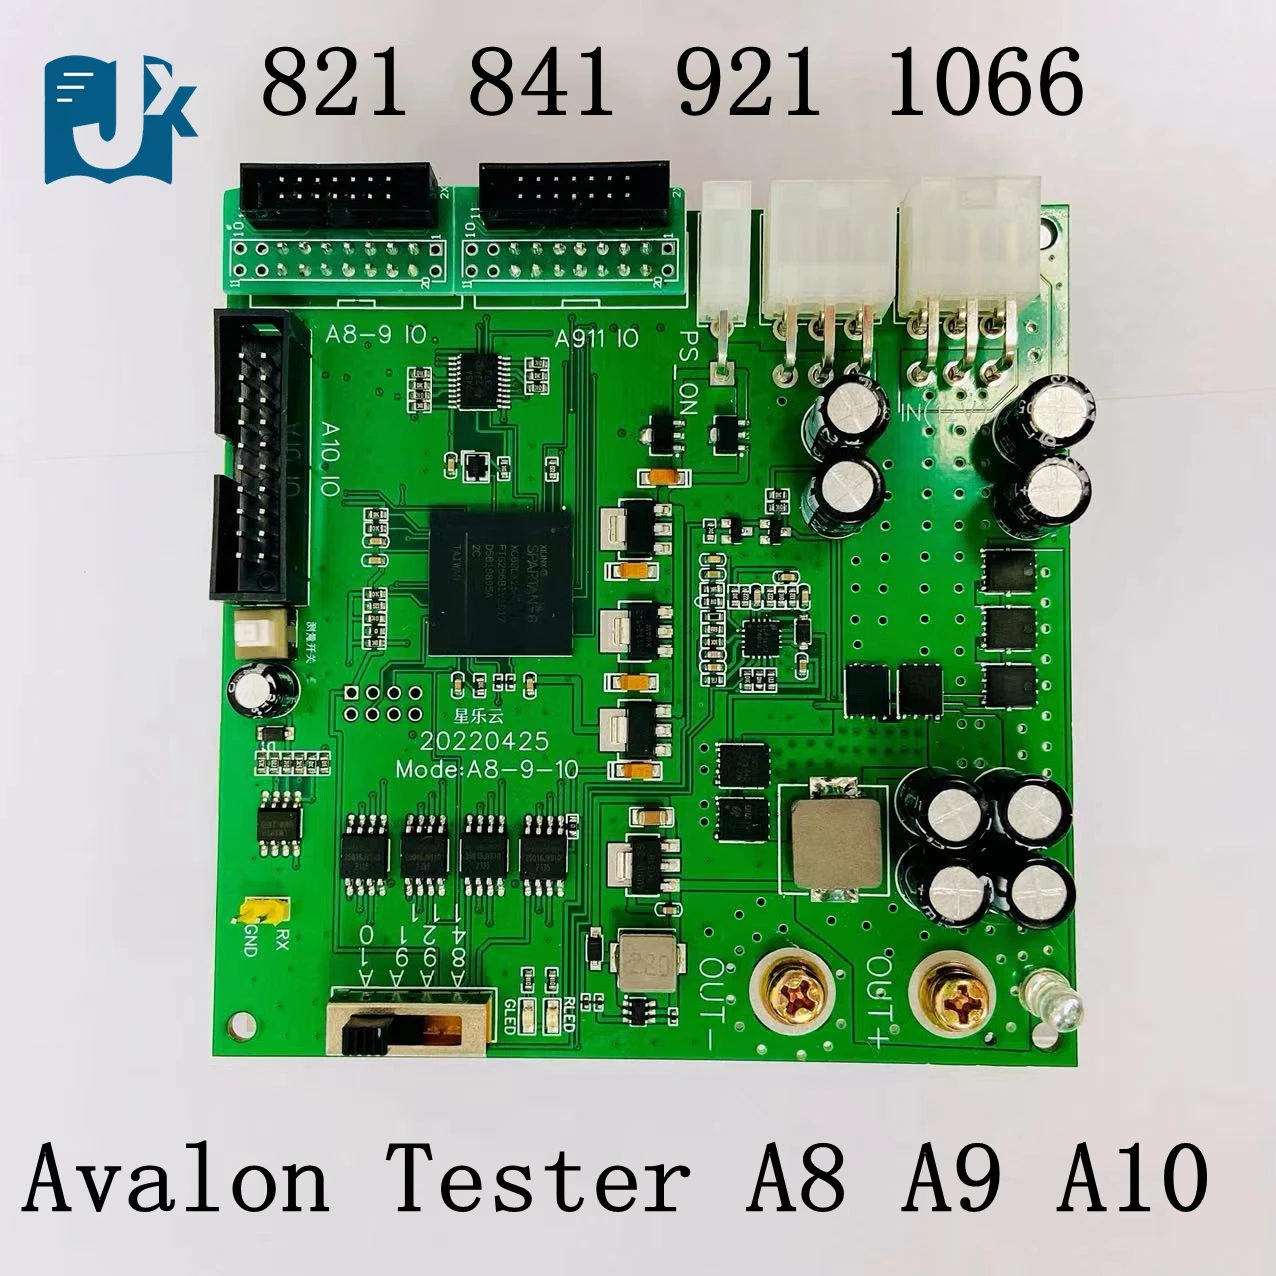 Avalon  A8 A9 A10 Series Test Stand 821 841 921 1066 Tester Force Calculation Table Test Suite Hash Board Instrument